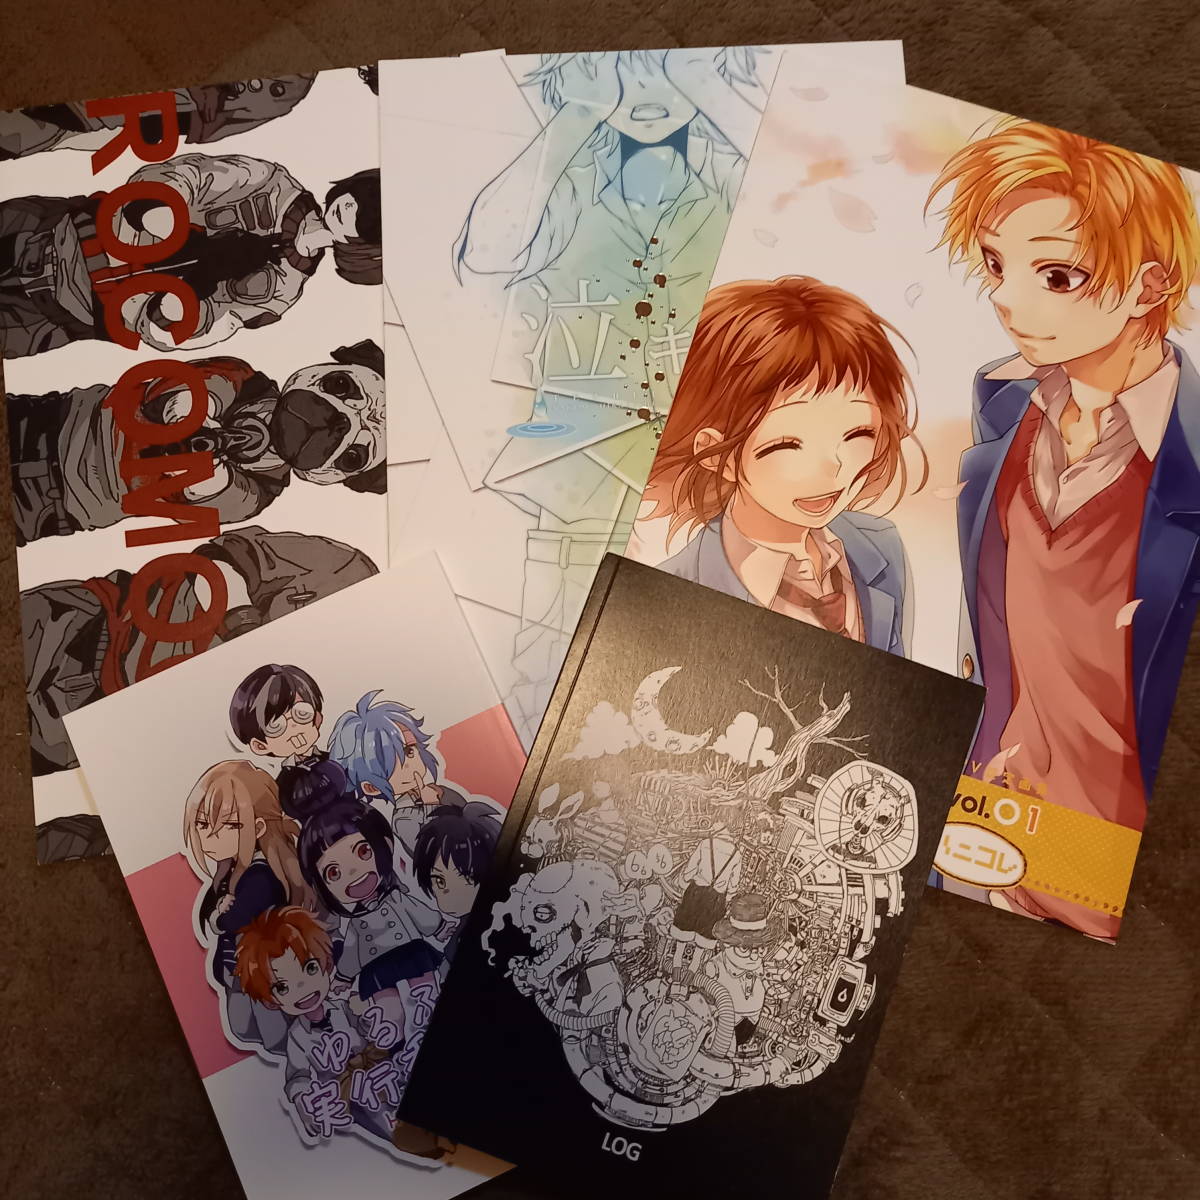 Honeyworks イラスト集 画集 Product Details Yahoo Auctions Japan Proxy Bidding And Shopping Service From Japan